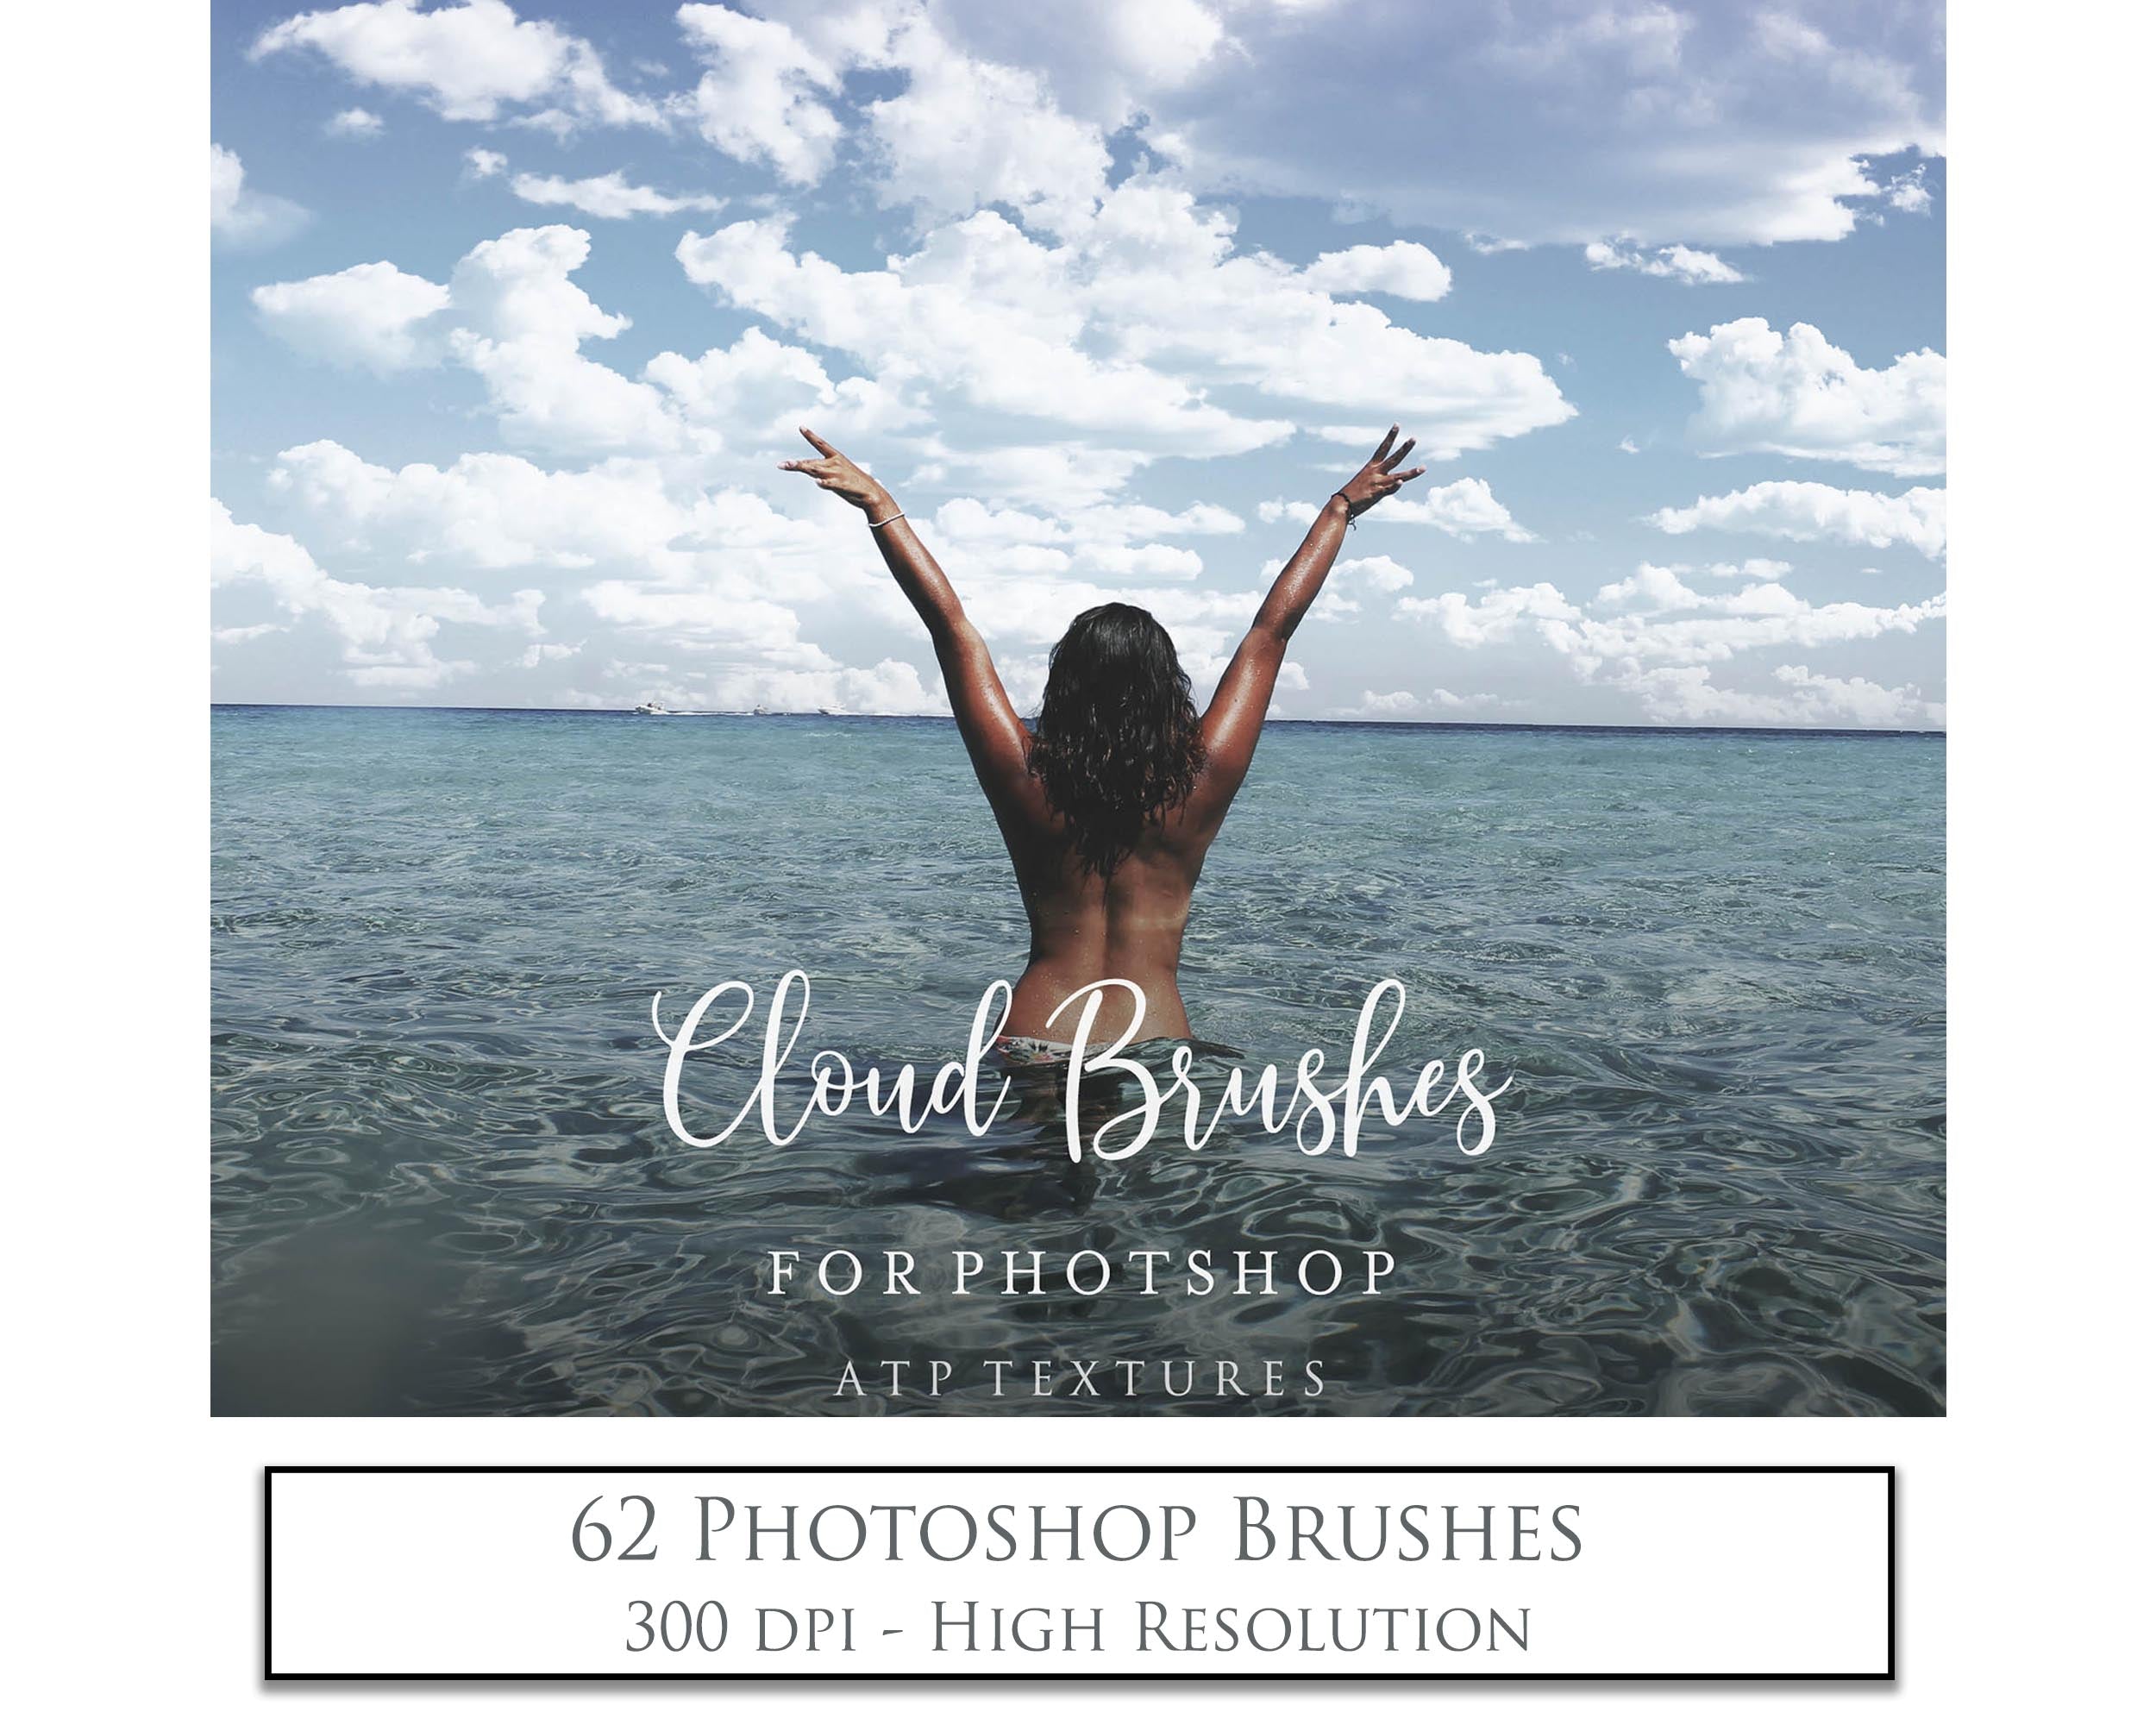 Cloud brushes for photographers. High Resolution Photoshop brushes for photography and digital design.  Digital Stamps for scrapbooking, create photo overlays and use in graphic design. Assets and Add ons. High resolution digital files.  ATP Textures 